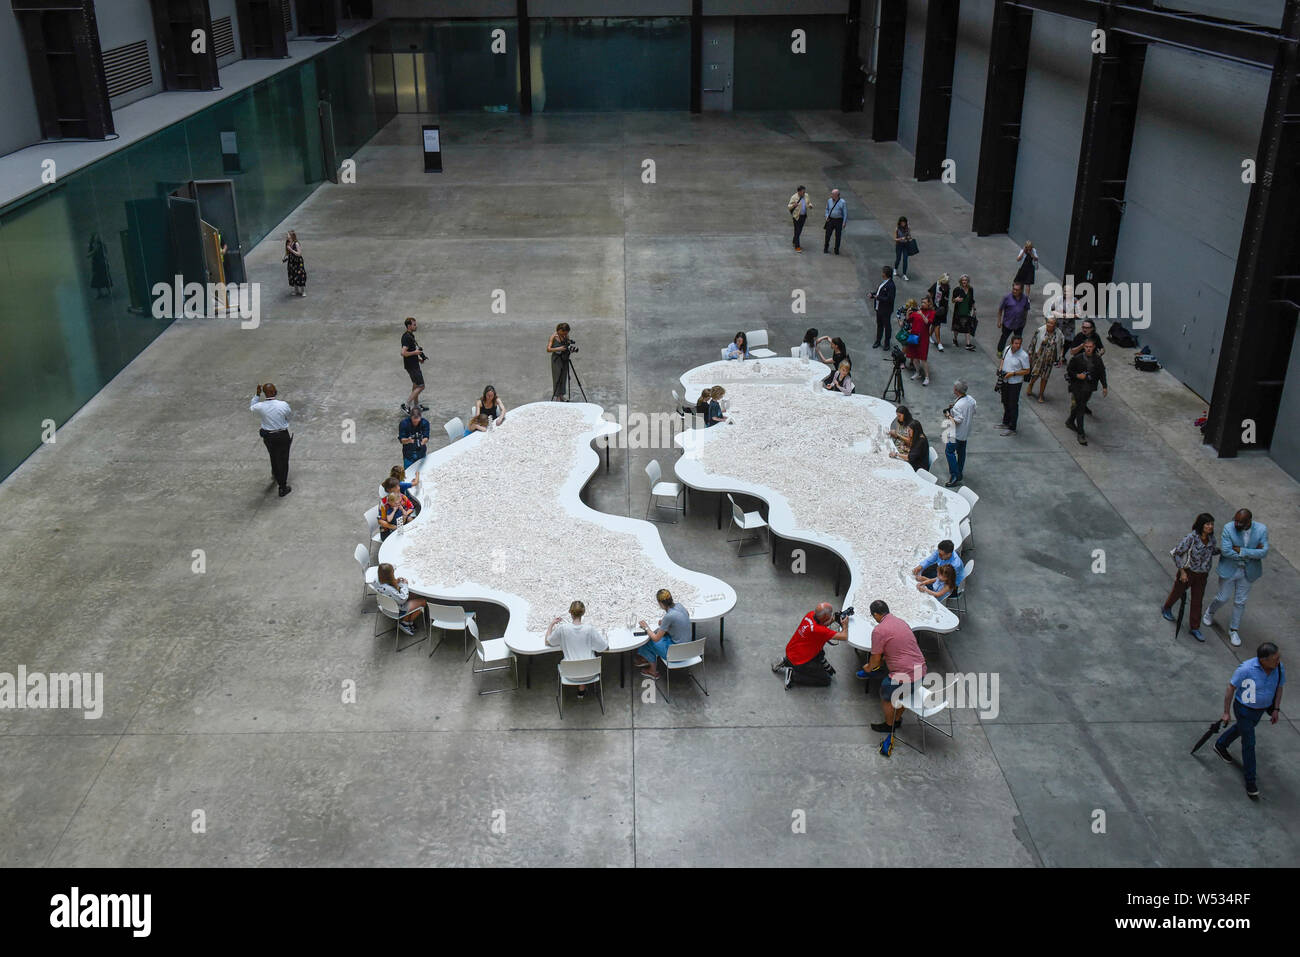 London, UK. 26 July 2019. A general views tables with Lego at the preview of "The structural evolution project", 2004, by Olafur at Tate Modern. Exhibited for the first